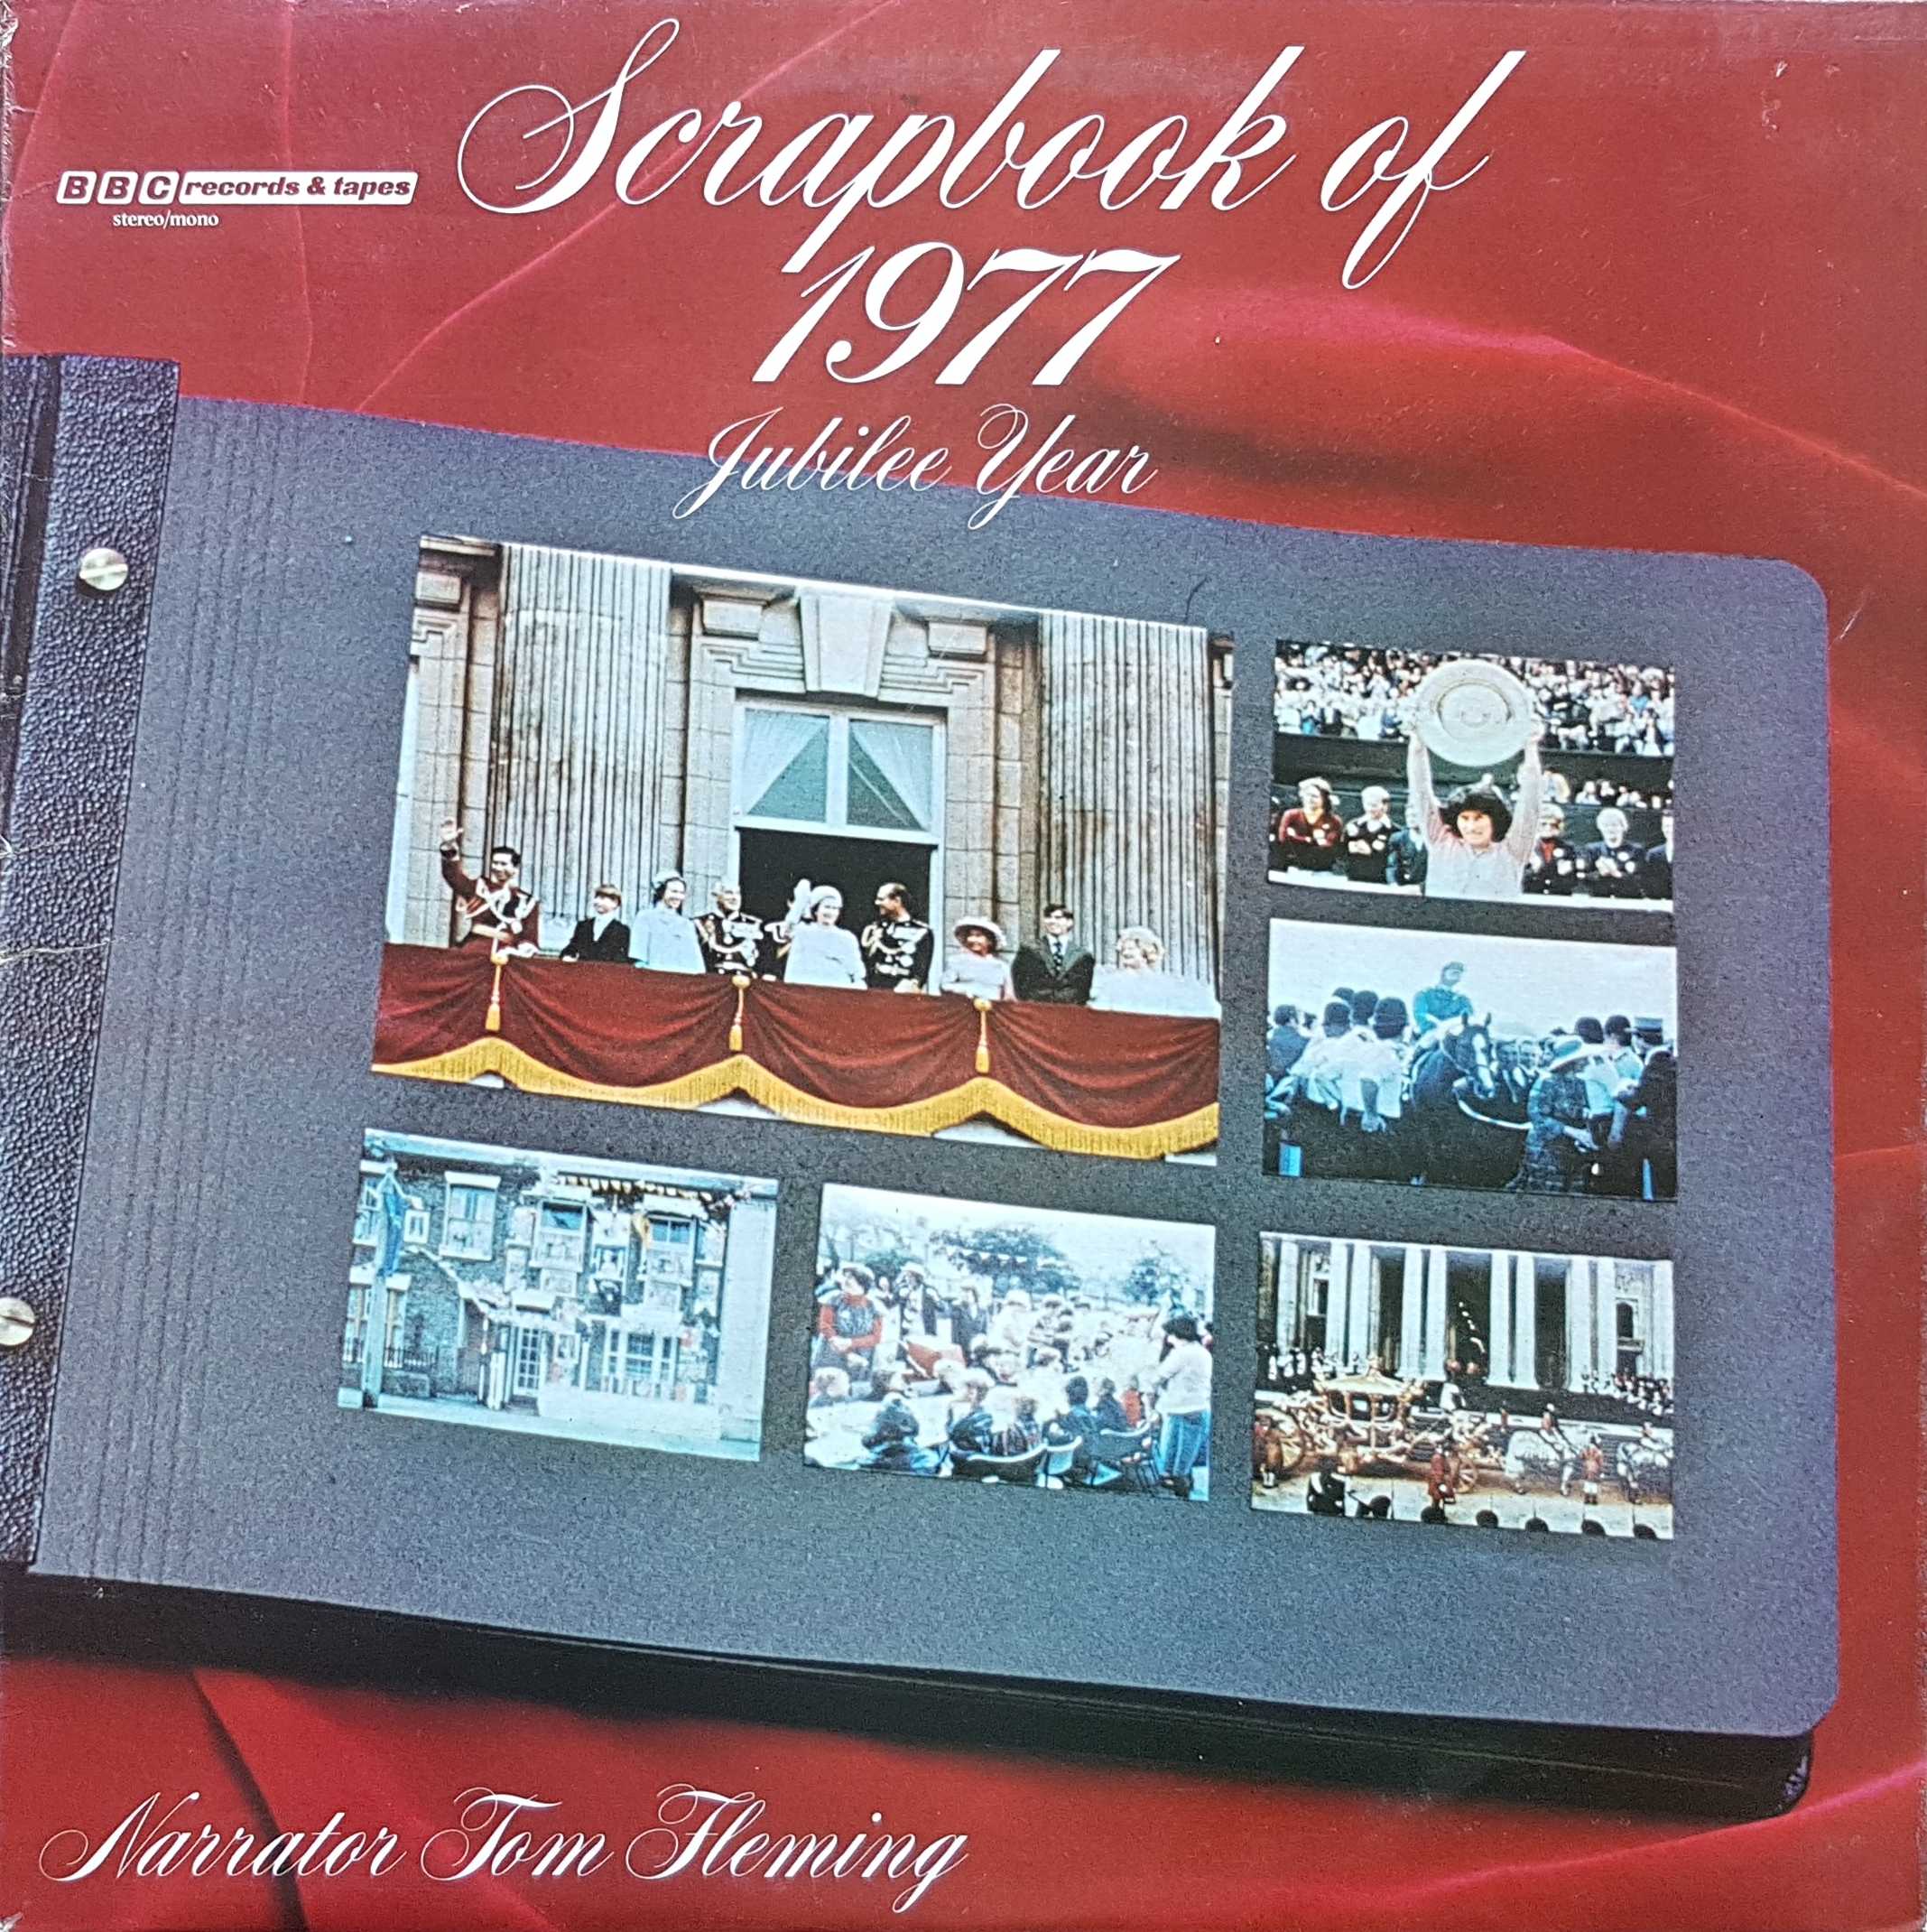 Picture of REC 303 Scrapbook of 1977: Jubilee Year by artist Tom Fleming from the BBC albums - Records and Tapes library